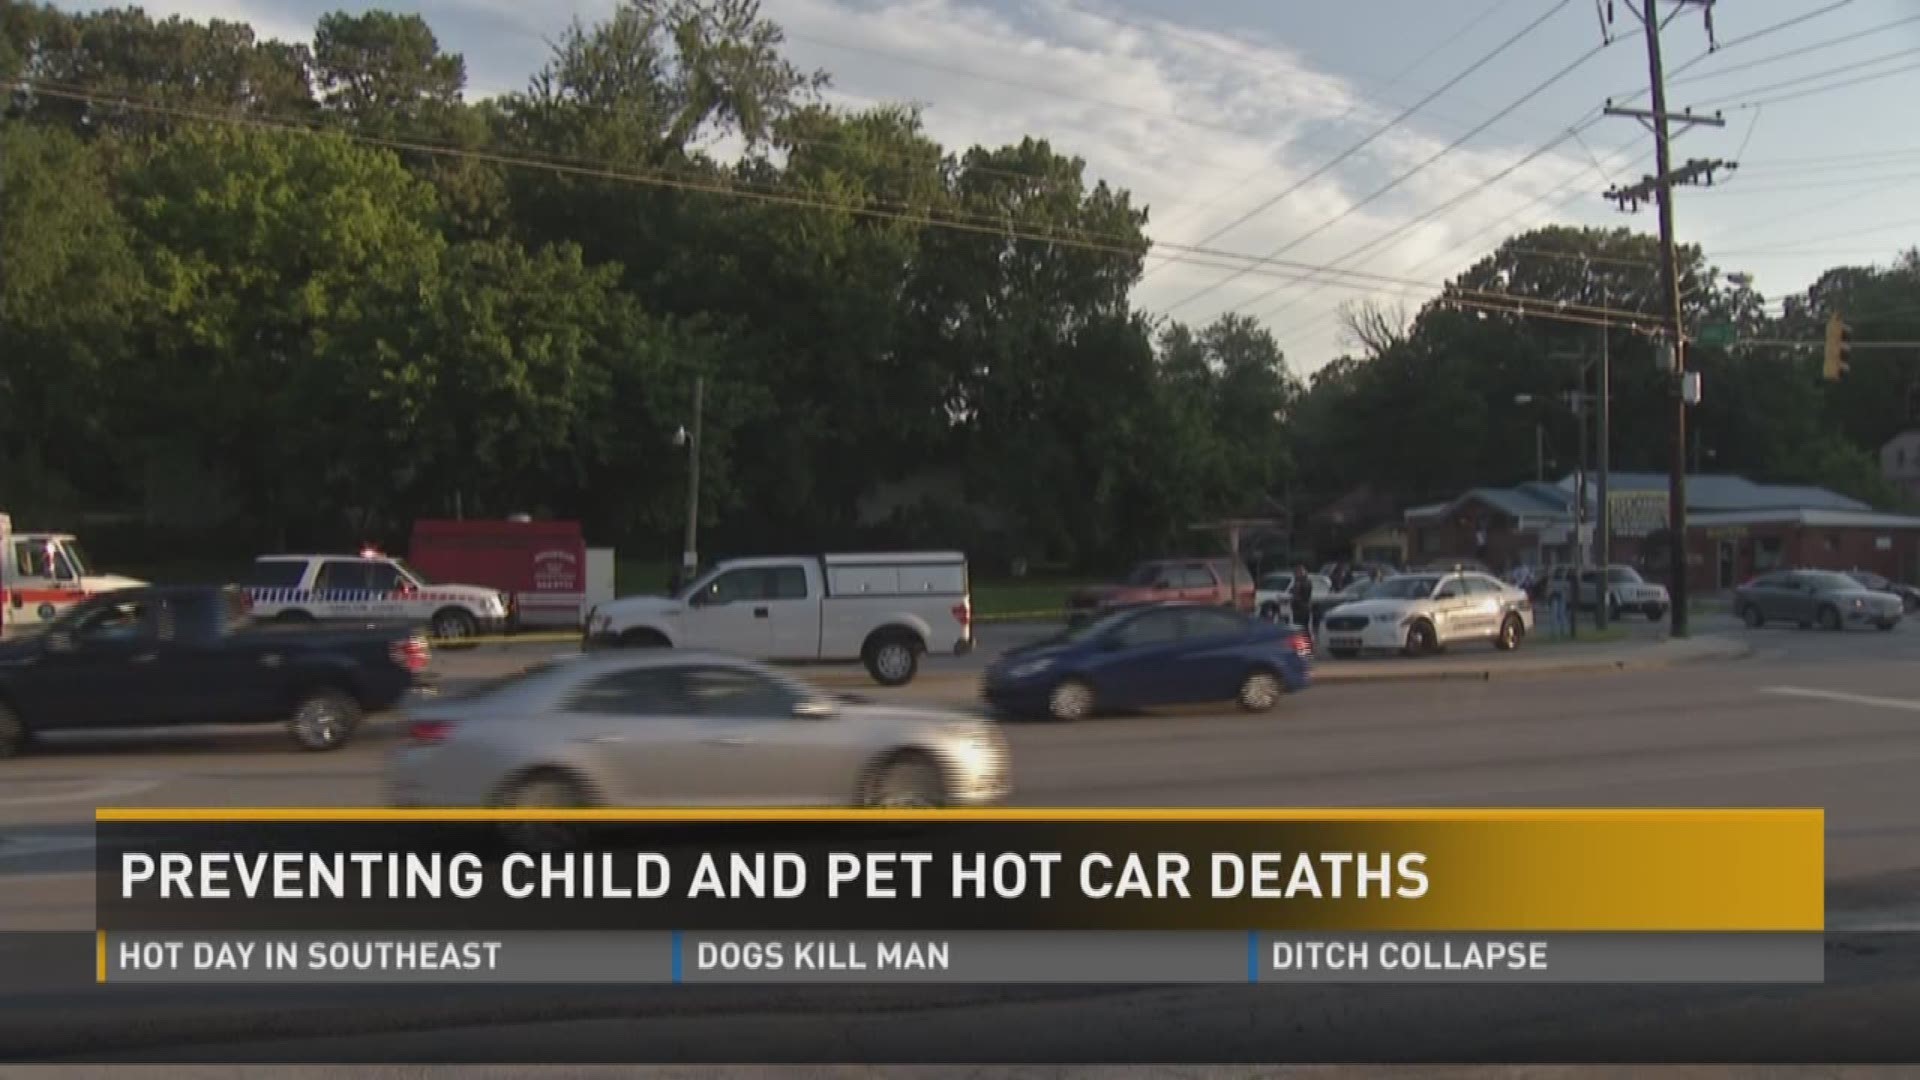 July 11, 2017: So far in 2017, 19 children across the country have died in  hot cars. One of those happened right here in Tennessee.